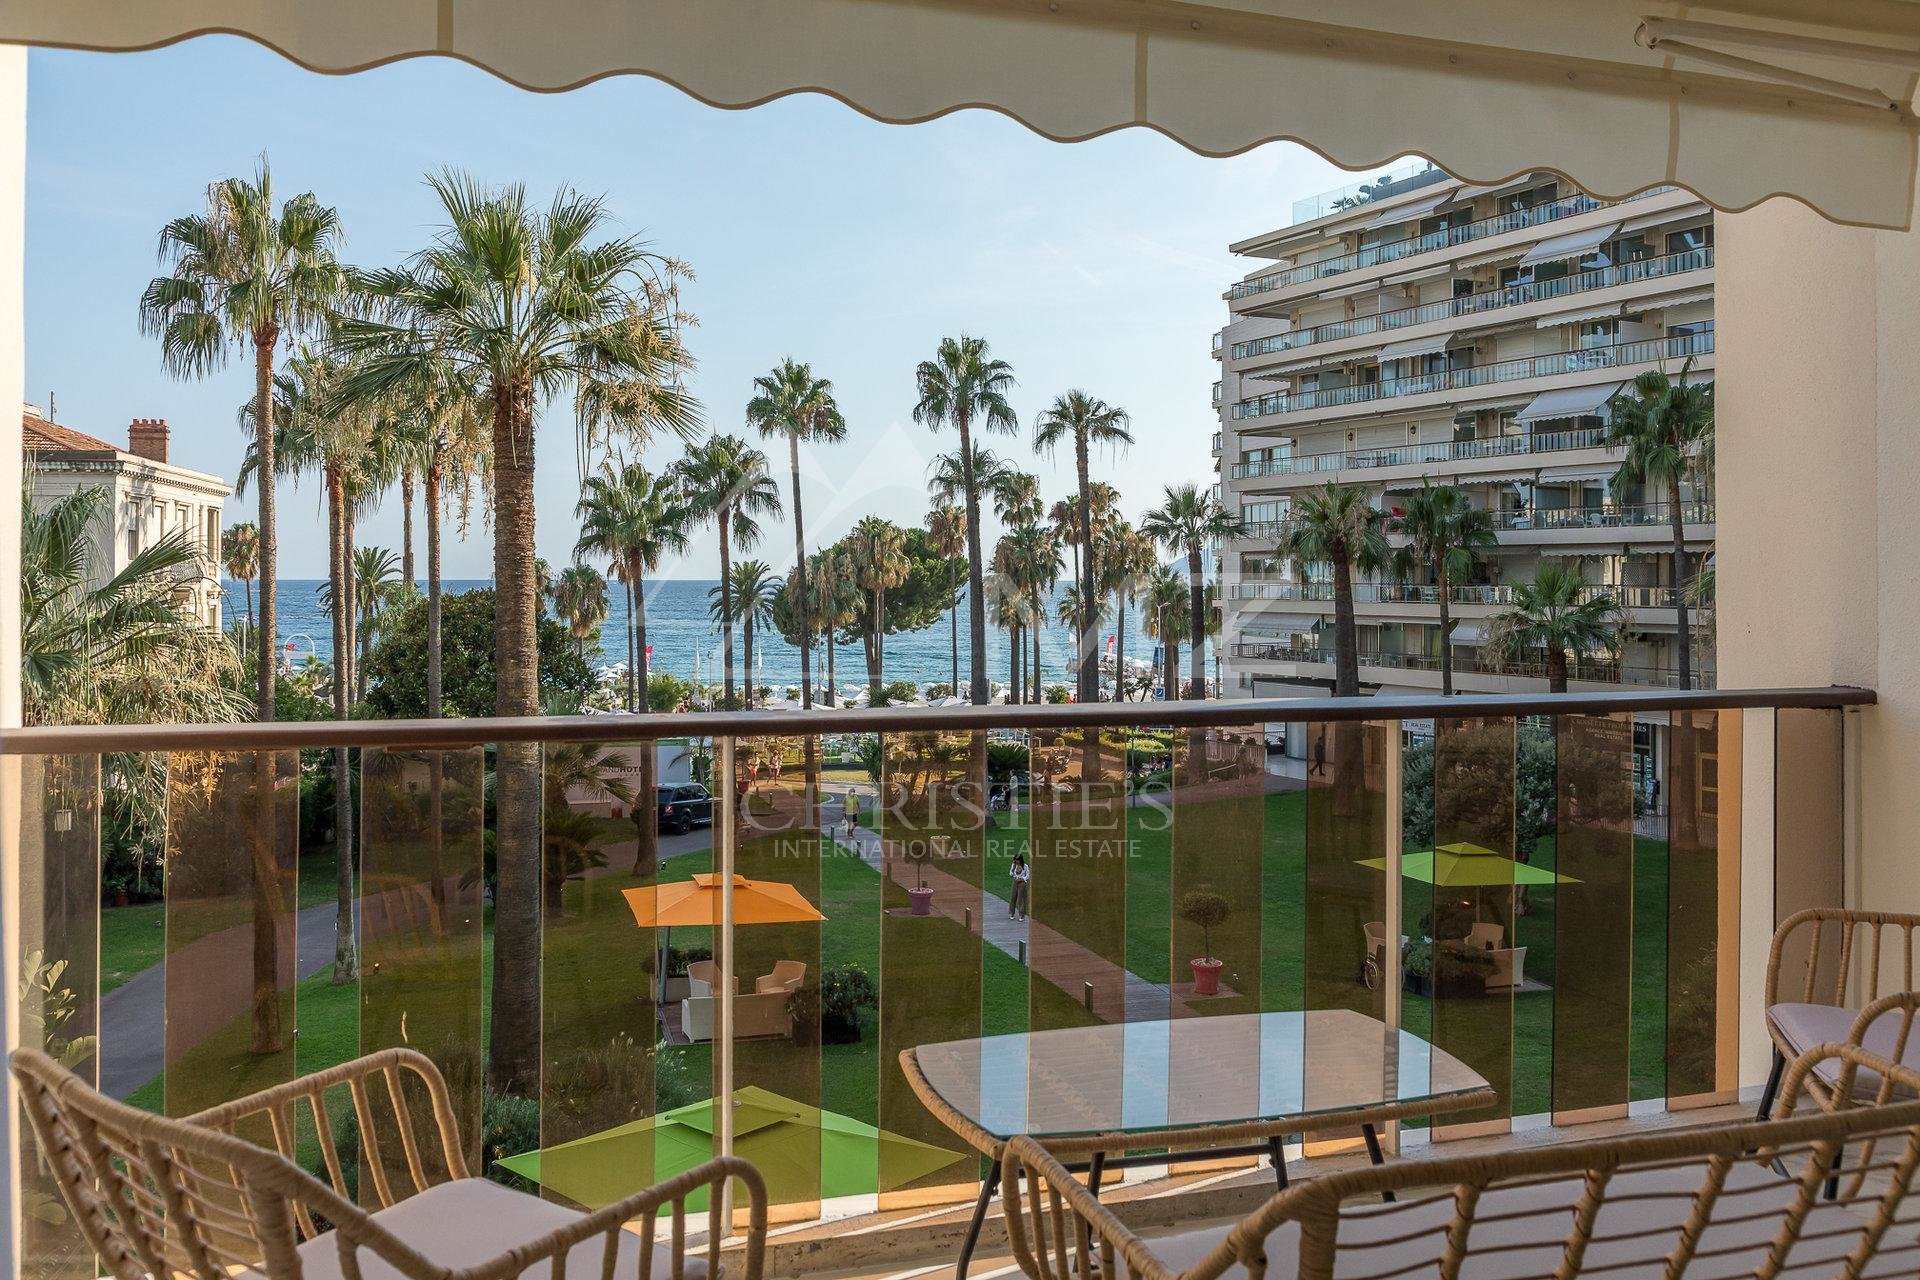 Overig - Cannes -  